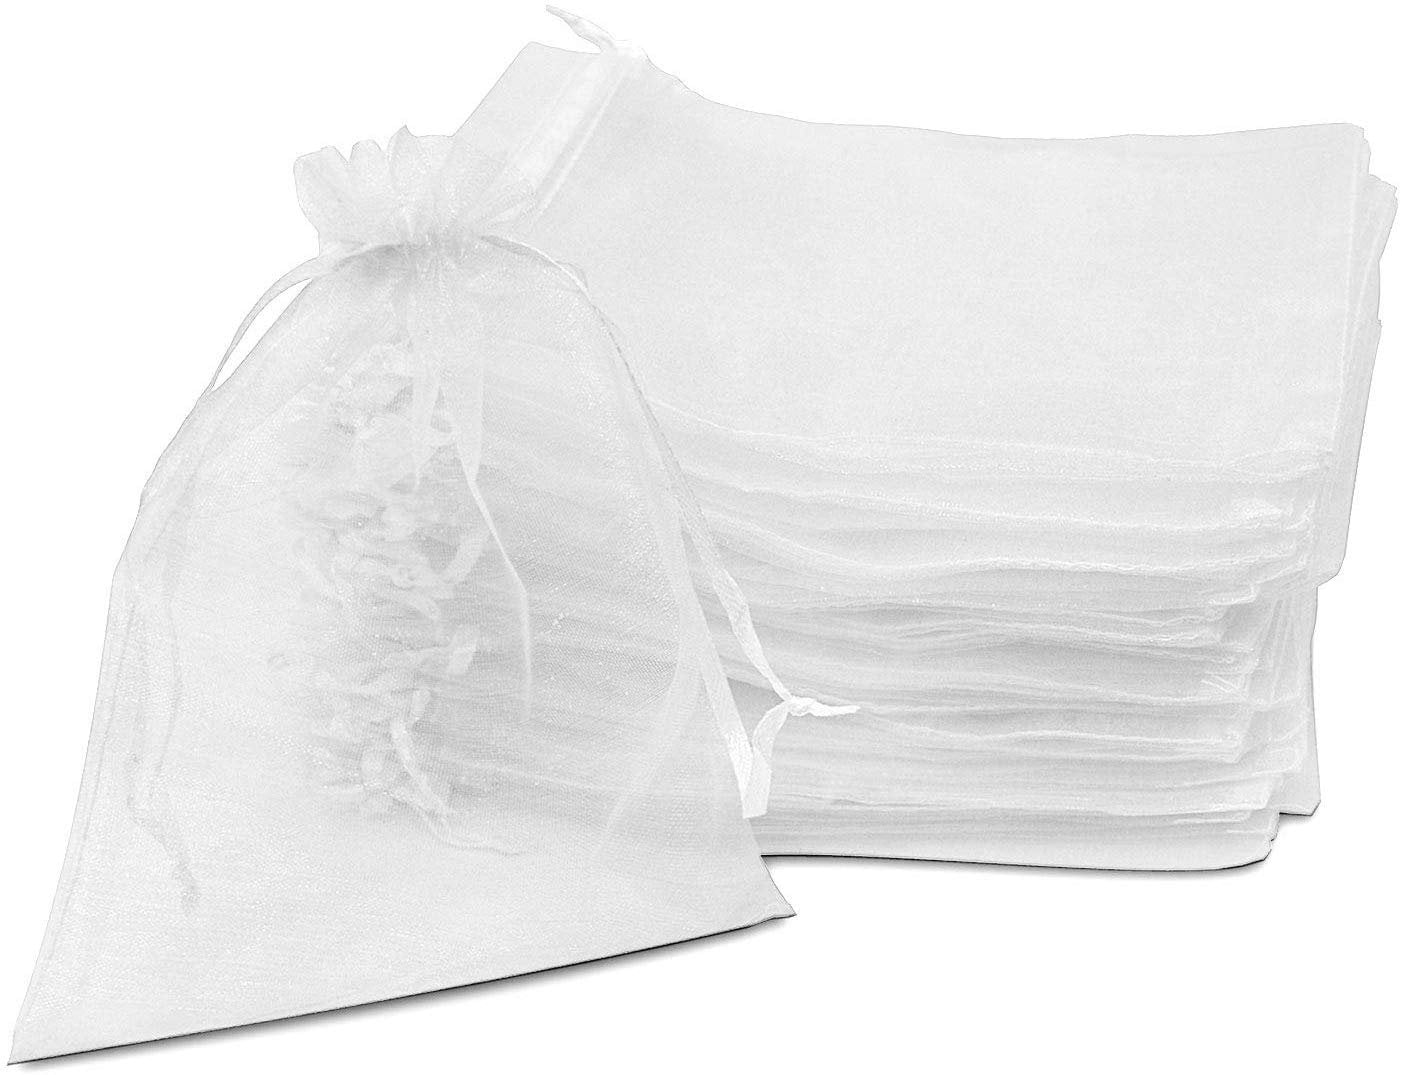 Jewelry Mini White Sachet Mesh Cloth Bags in Bulk for Business Candy Treats Organza Bags Party Favor Gifts Lip Gloss Soap 100 Pack 5x7 Inch Small Sheer Drawstring Pouches Weddings 